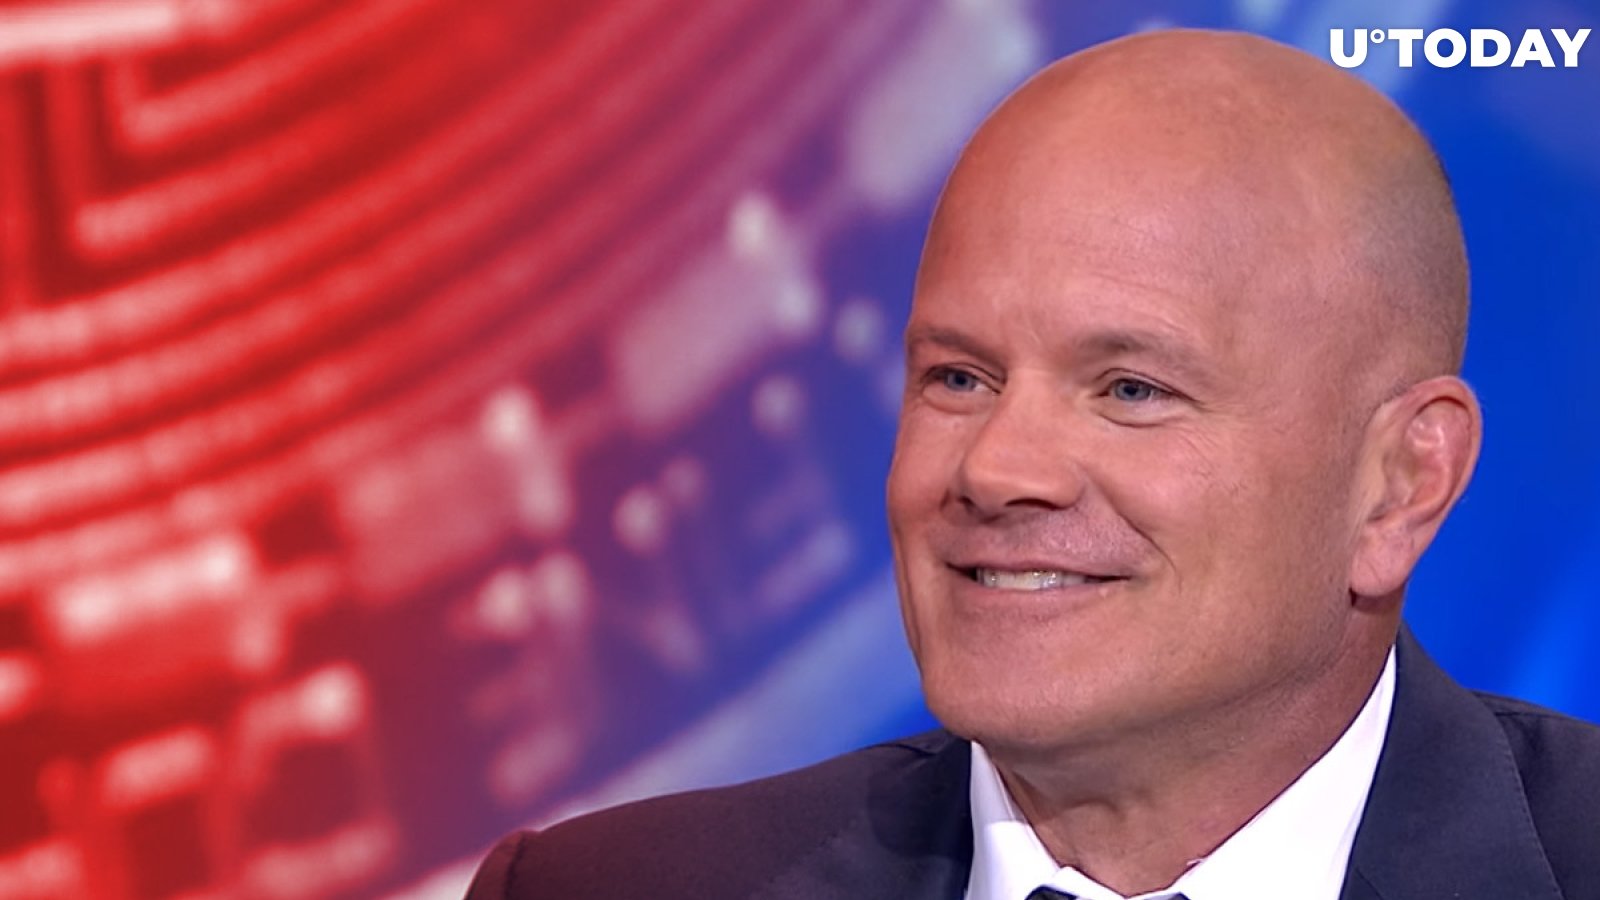 Bitcoin Bull Mike Novogratz on Chinese Crackdown: "Will Take Some Time to Play Out"